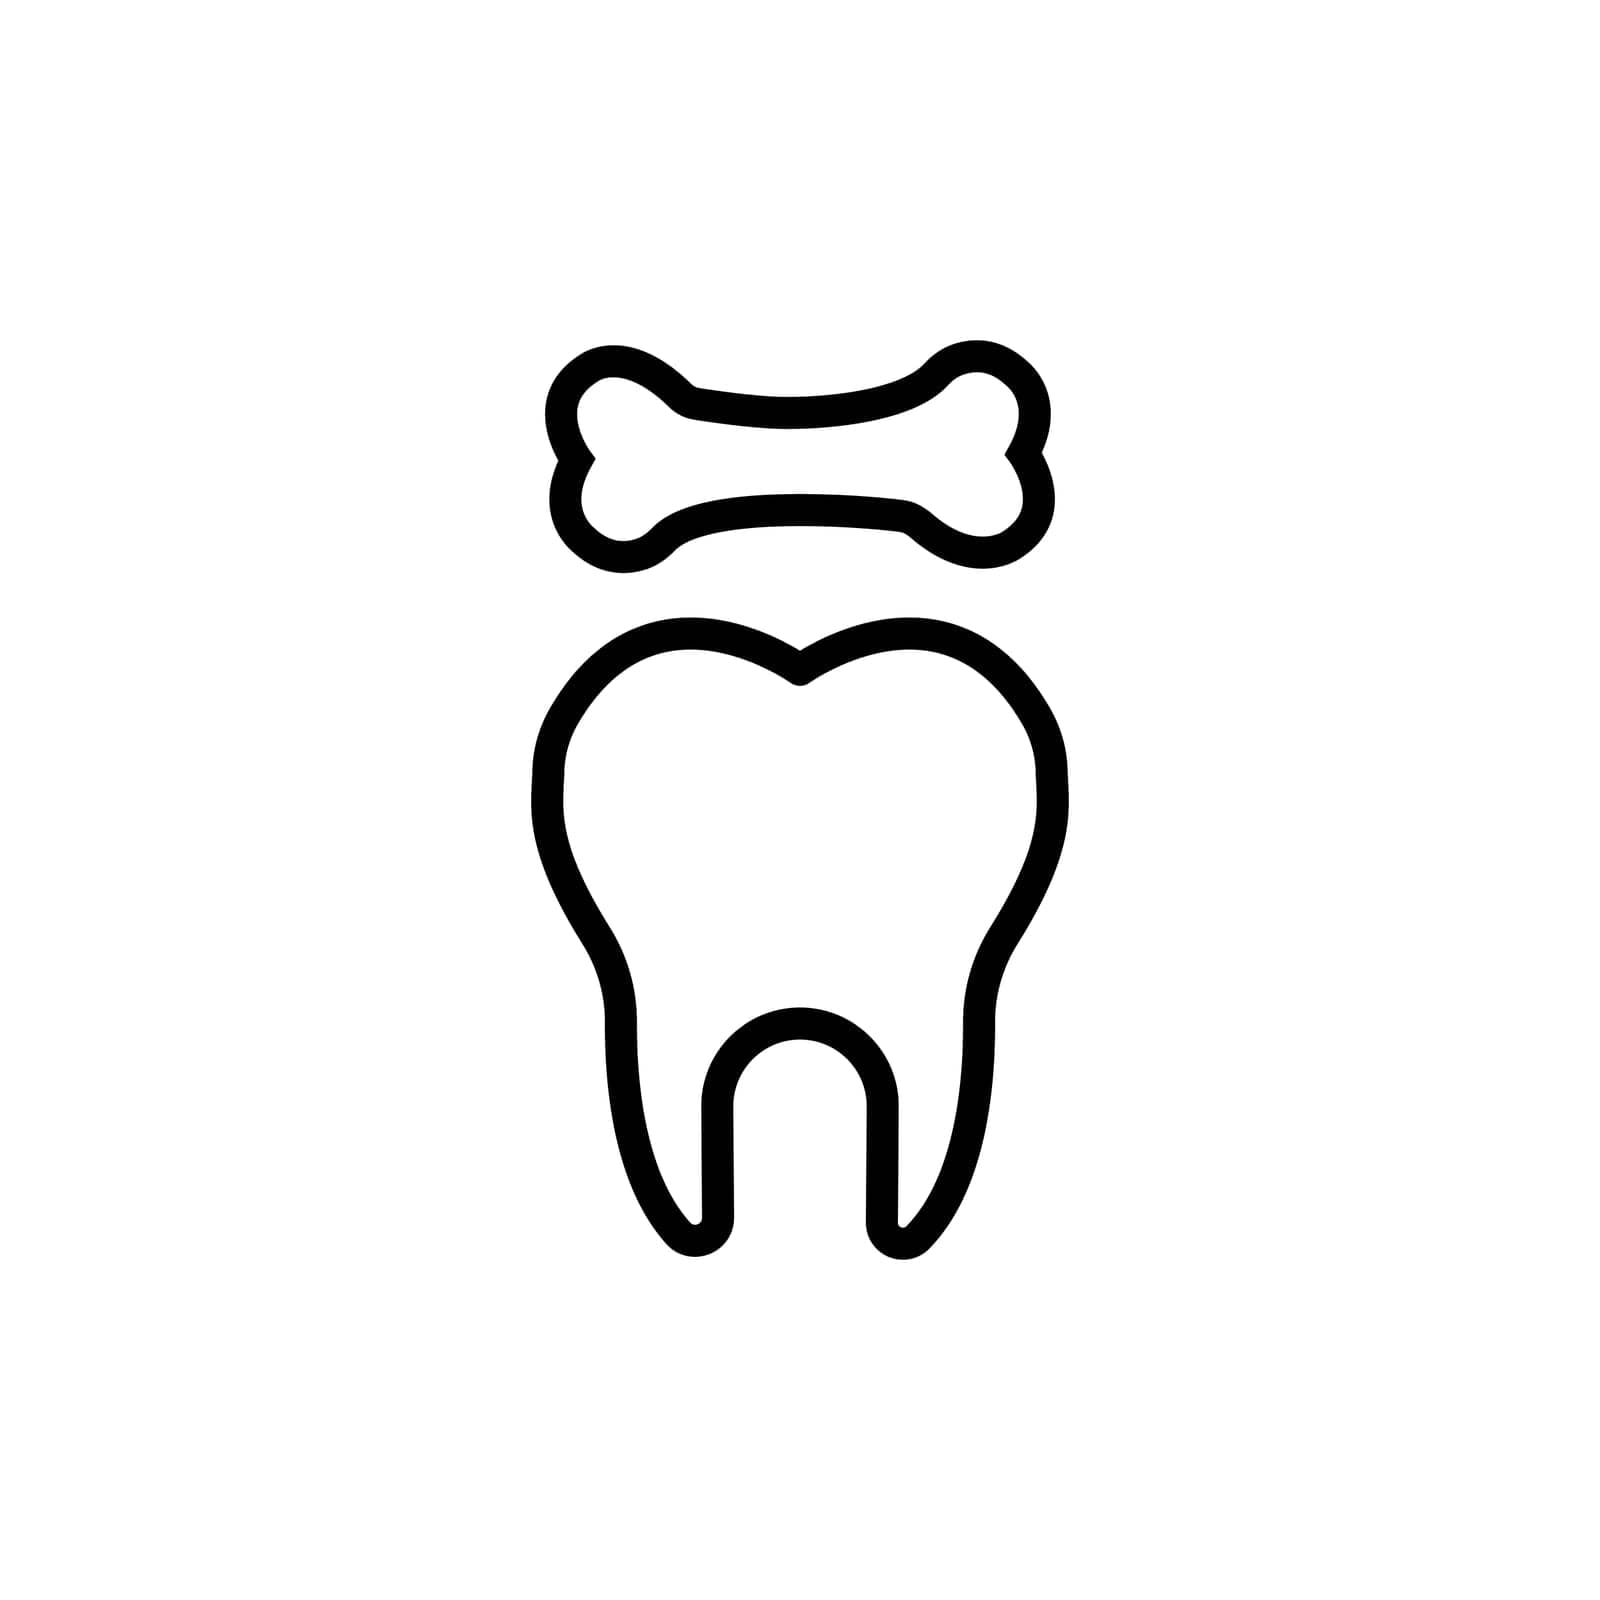 Strong bones and teeth vector icon. Isolated healthy pet food sign design. by Olgaufu